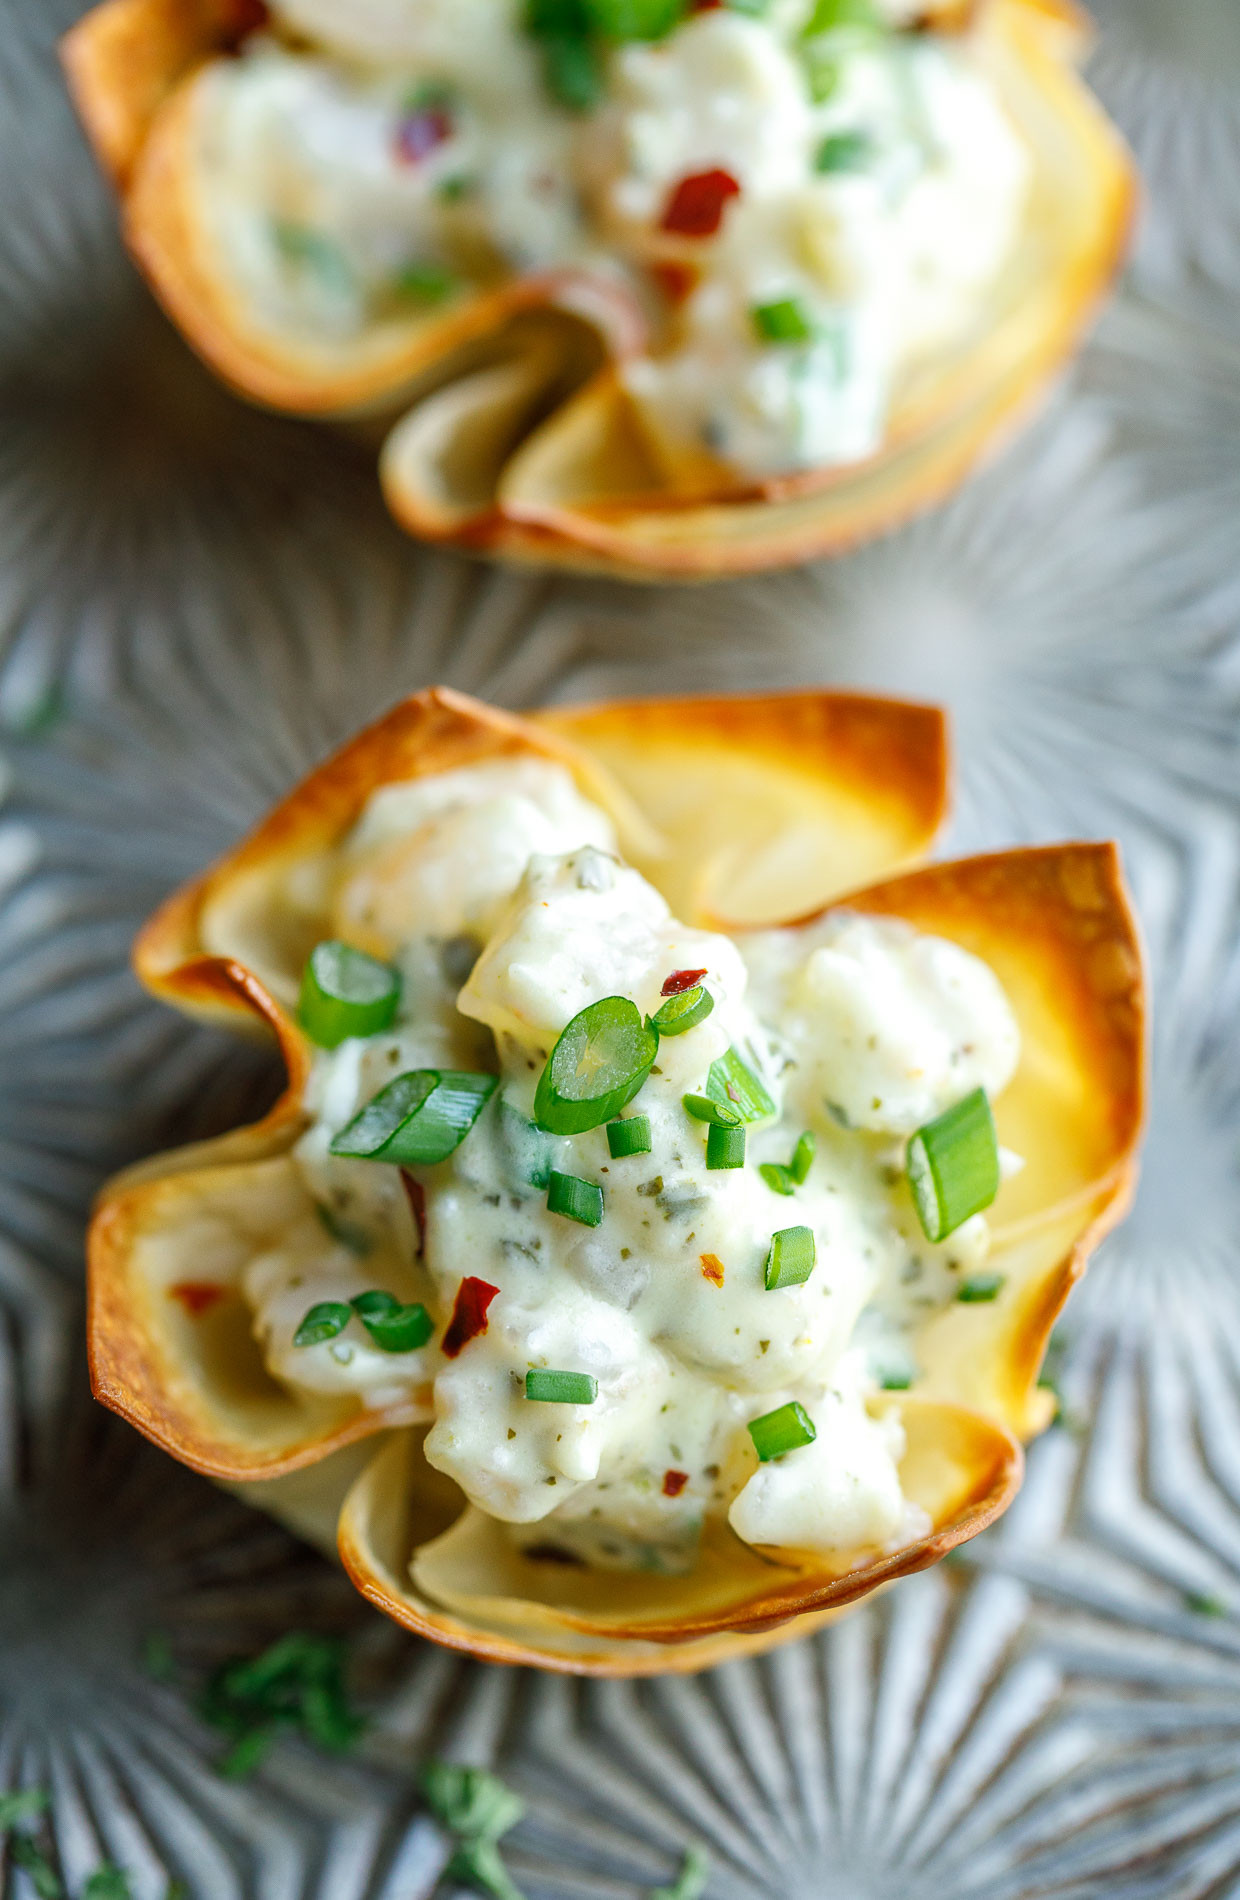 Wonton Appetizers With Cream Cheese
 10 Tasty Baked Wonton Recipes Using Wonton Wrappers